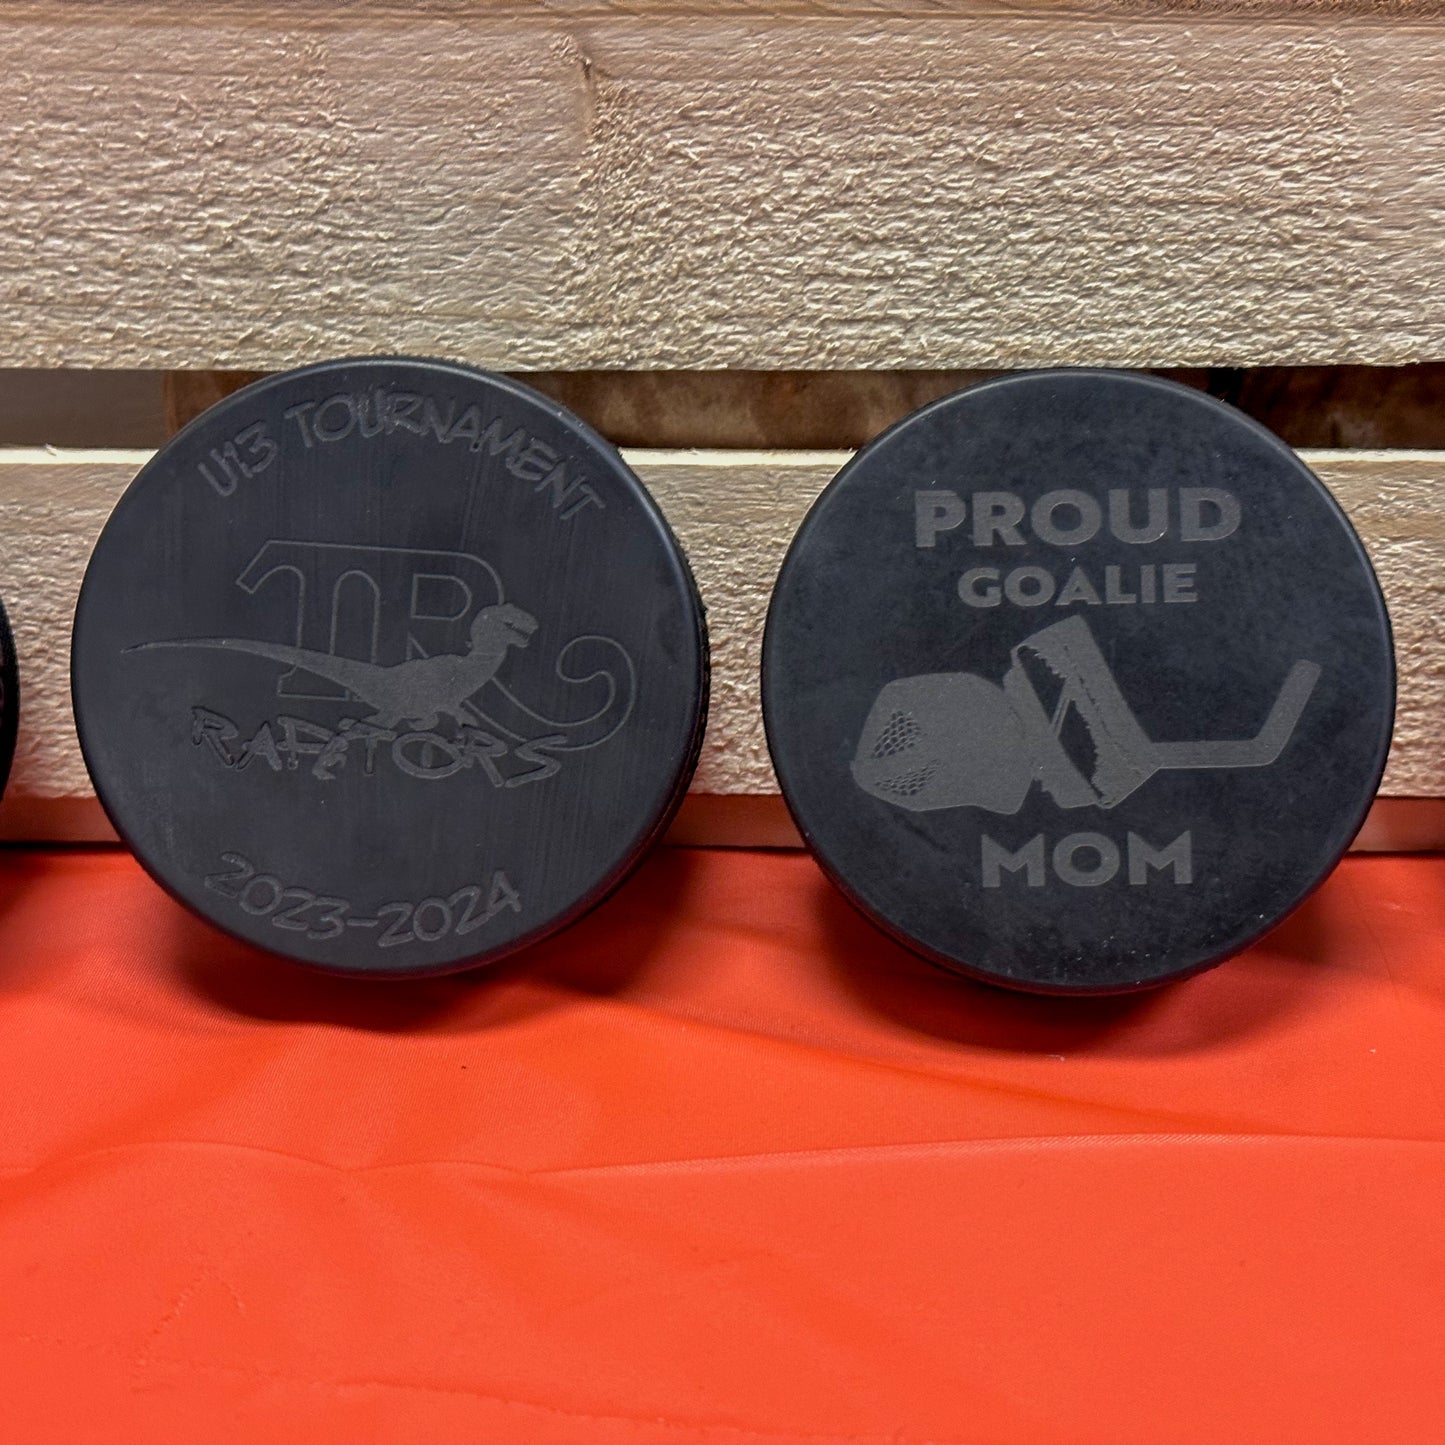 Two engraved hockey pucks rest against a wooden background. The left one is engraved with a team logo and tournament details. The right one is engraved with text reading Proud Goalie Mom with goalie blocker, glove, and stick.